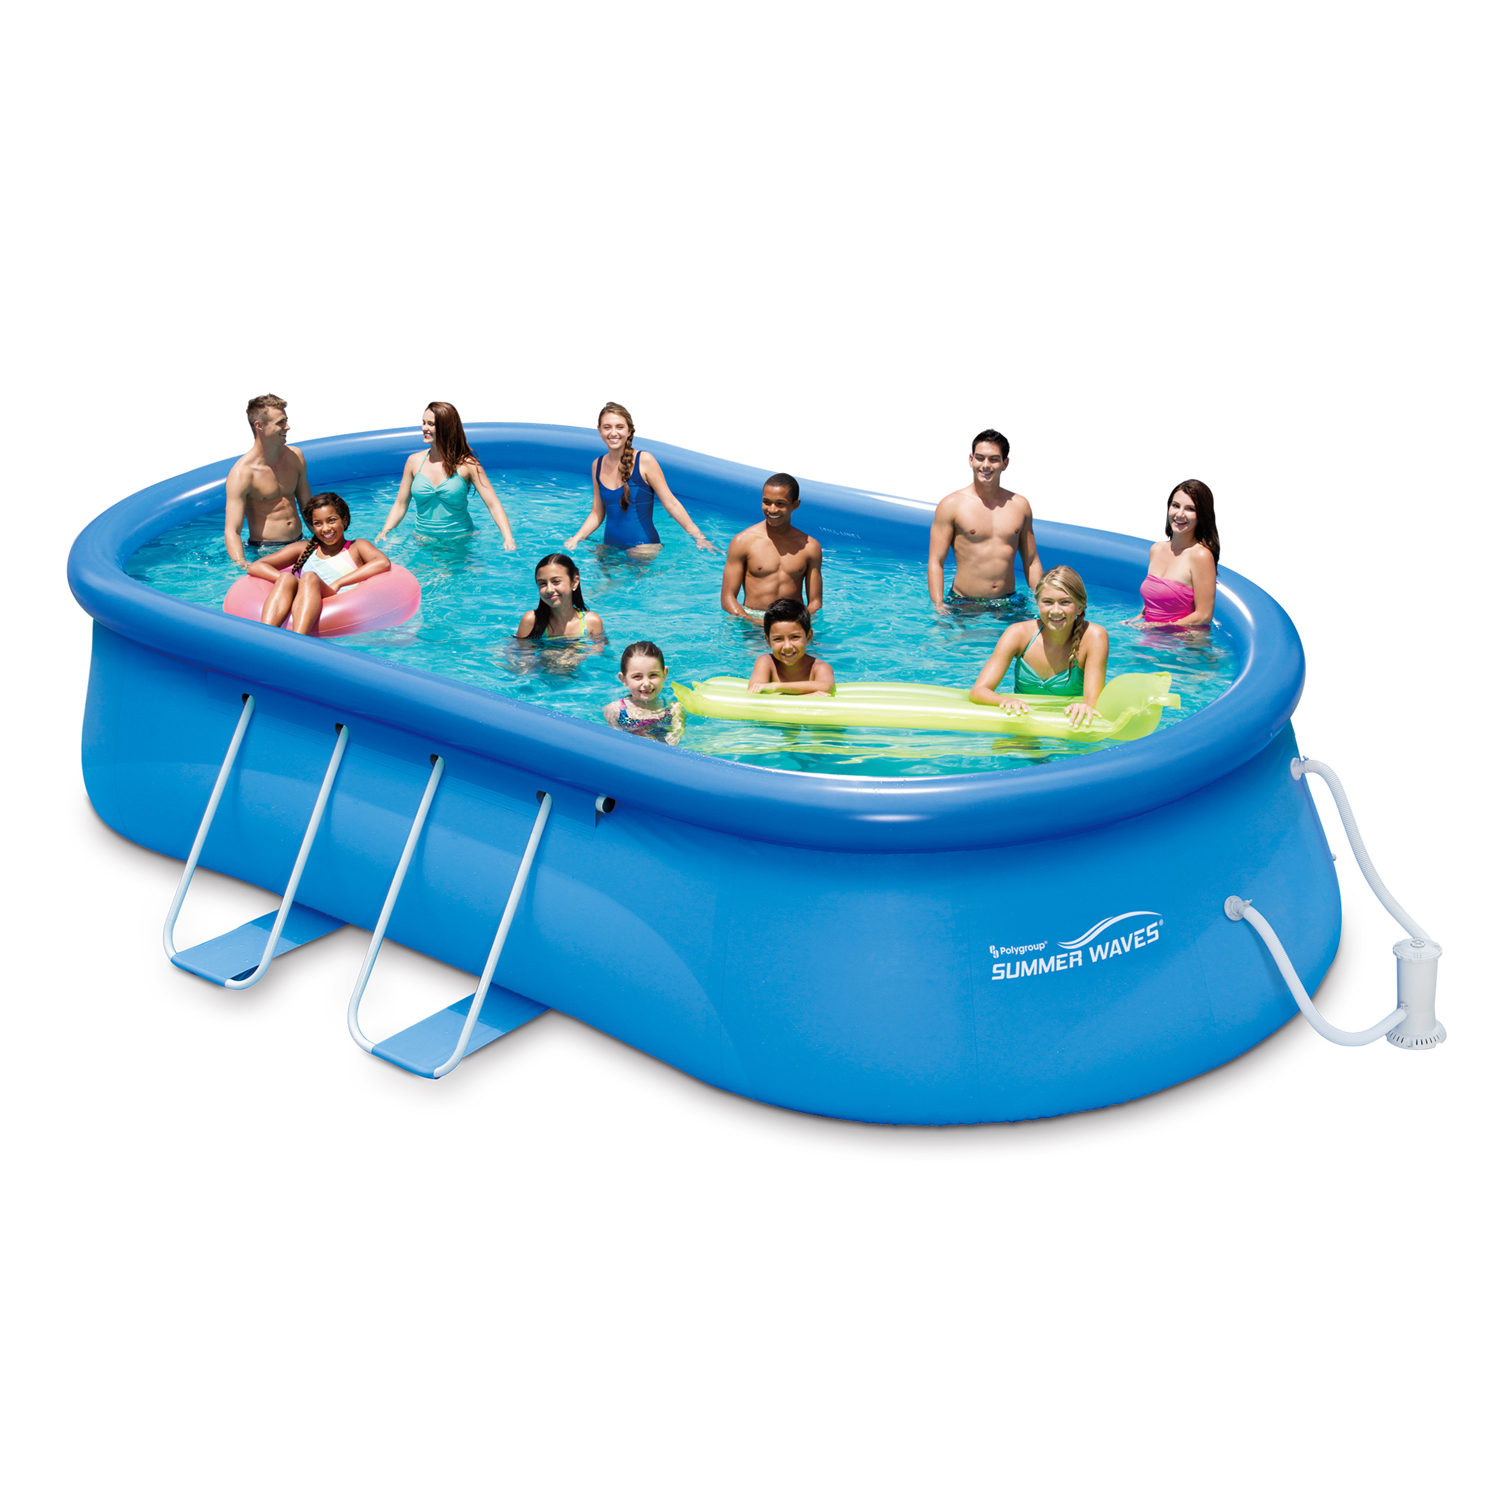 Summer Waves 20'x12'x48" Quick Set Oval Frame Swimming Pool - image 2 of 11